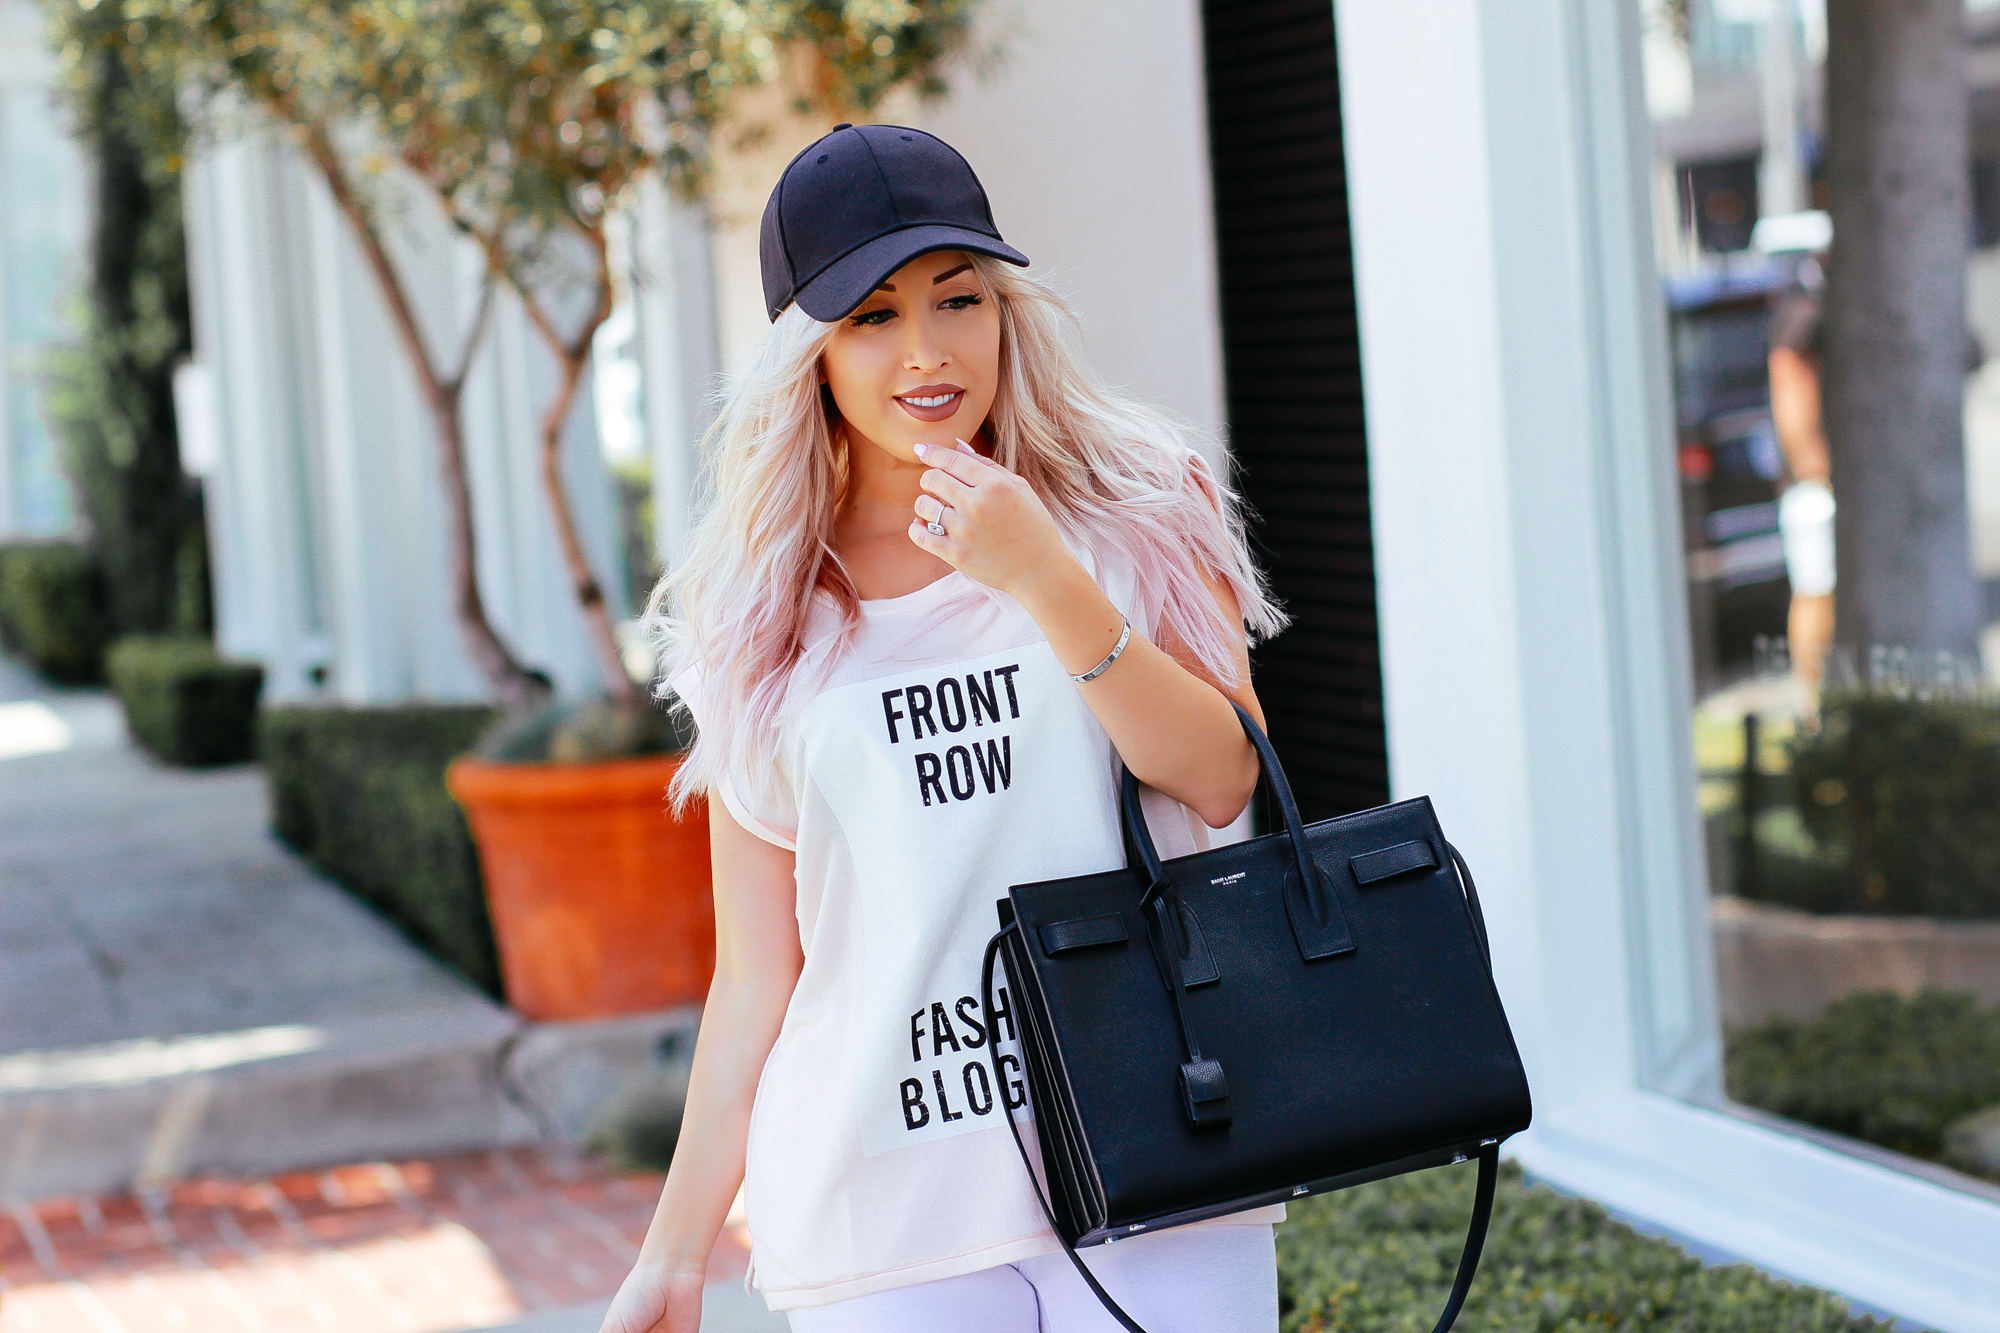 Blondie in the City | Front Row Fashion Blogger | Pastel Hair | Pink & White Outfit | YSL Bag